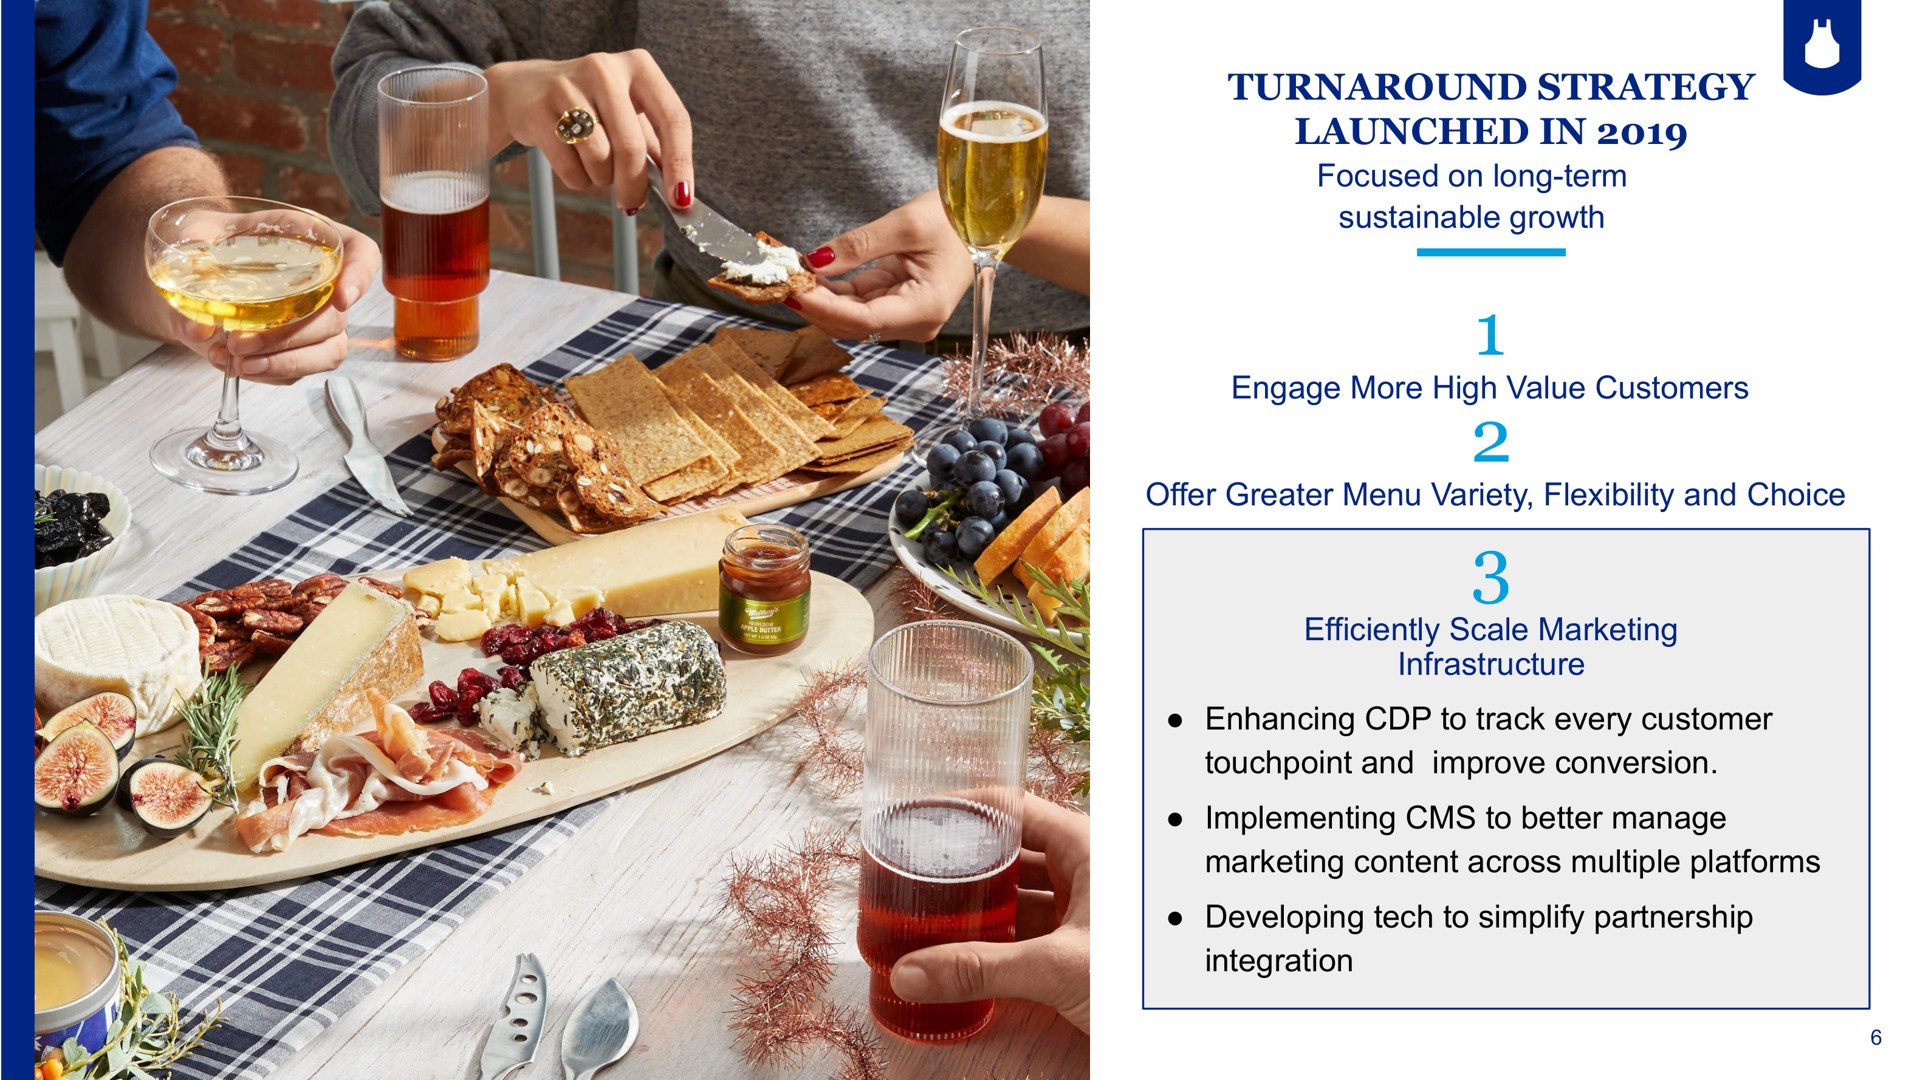 turnaround strategy launched in | Blue Apron